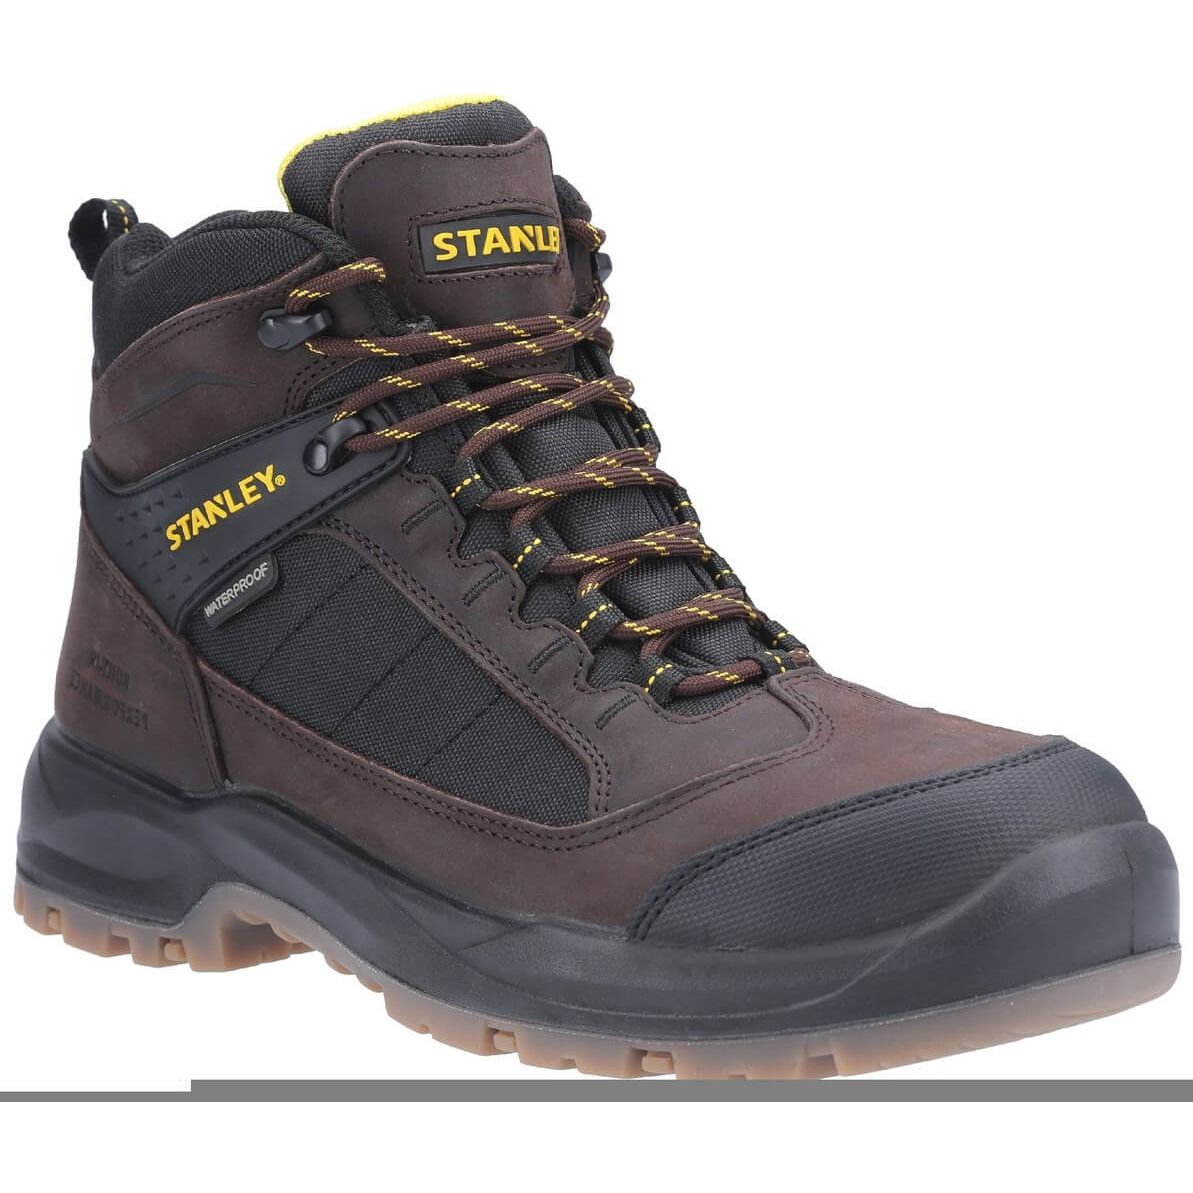  Stanley Unisex Tradesman Safety Boot Brown Size UK 12